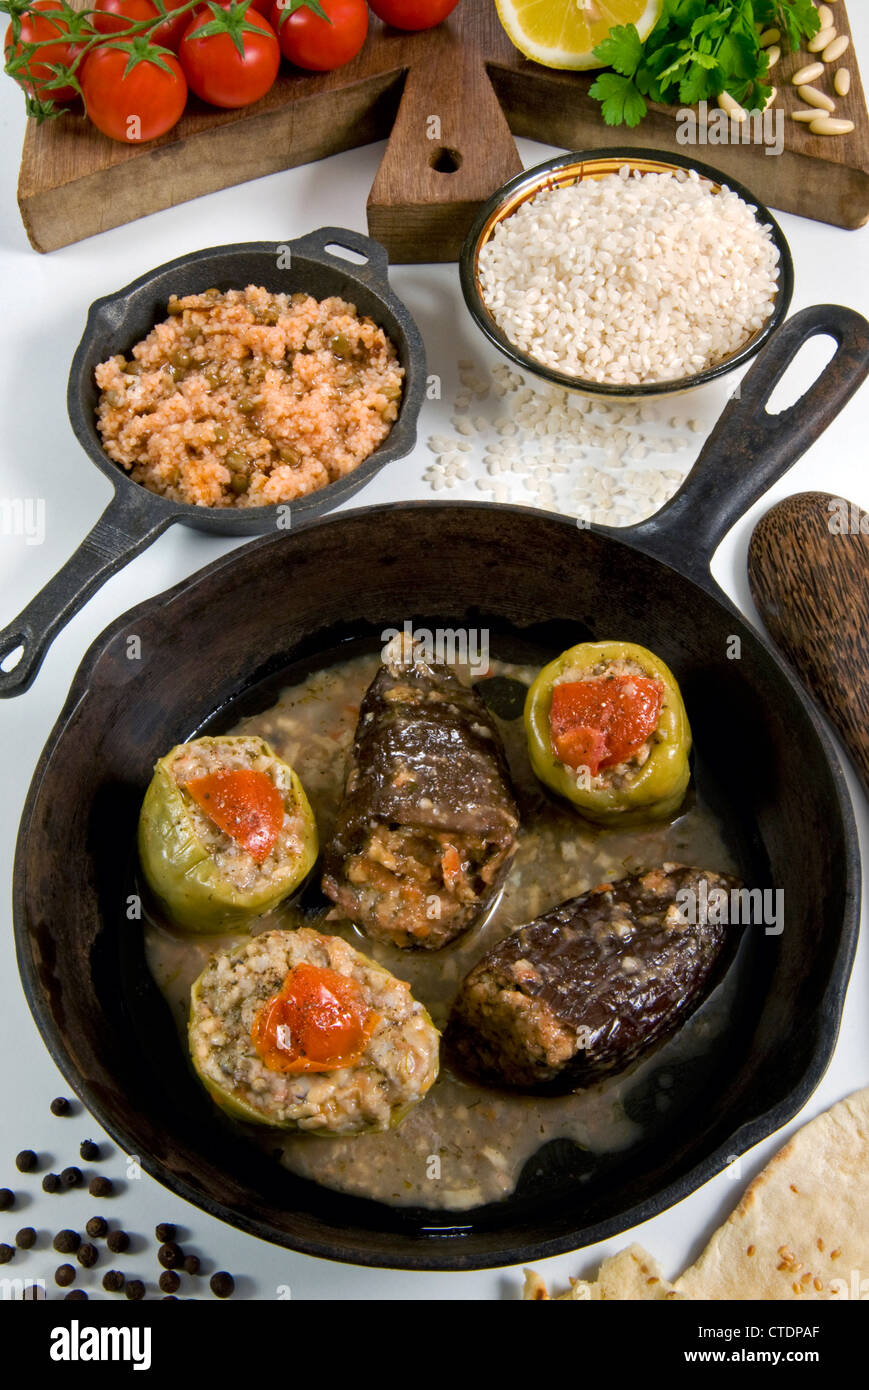 Biber Dolmasi, stuffed capsicum with meat, spices and rice, Turkish food, Turkey Stock Photo